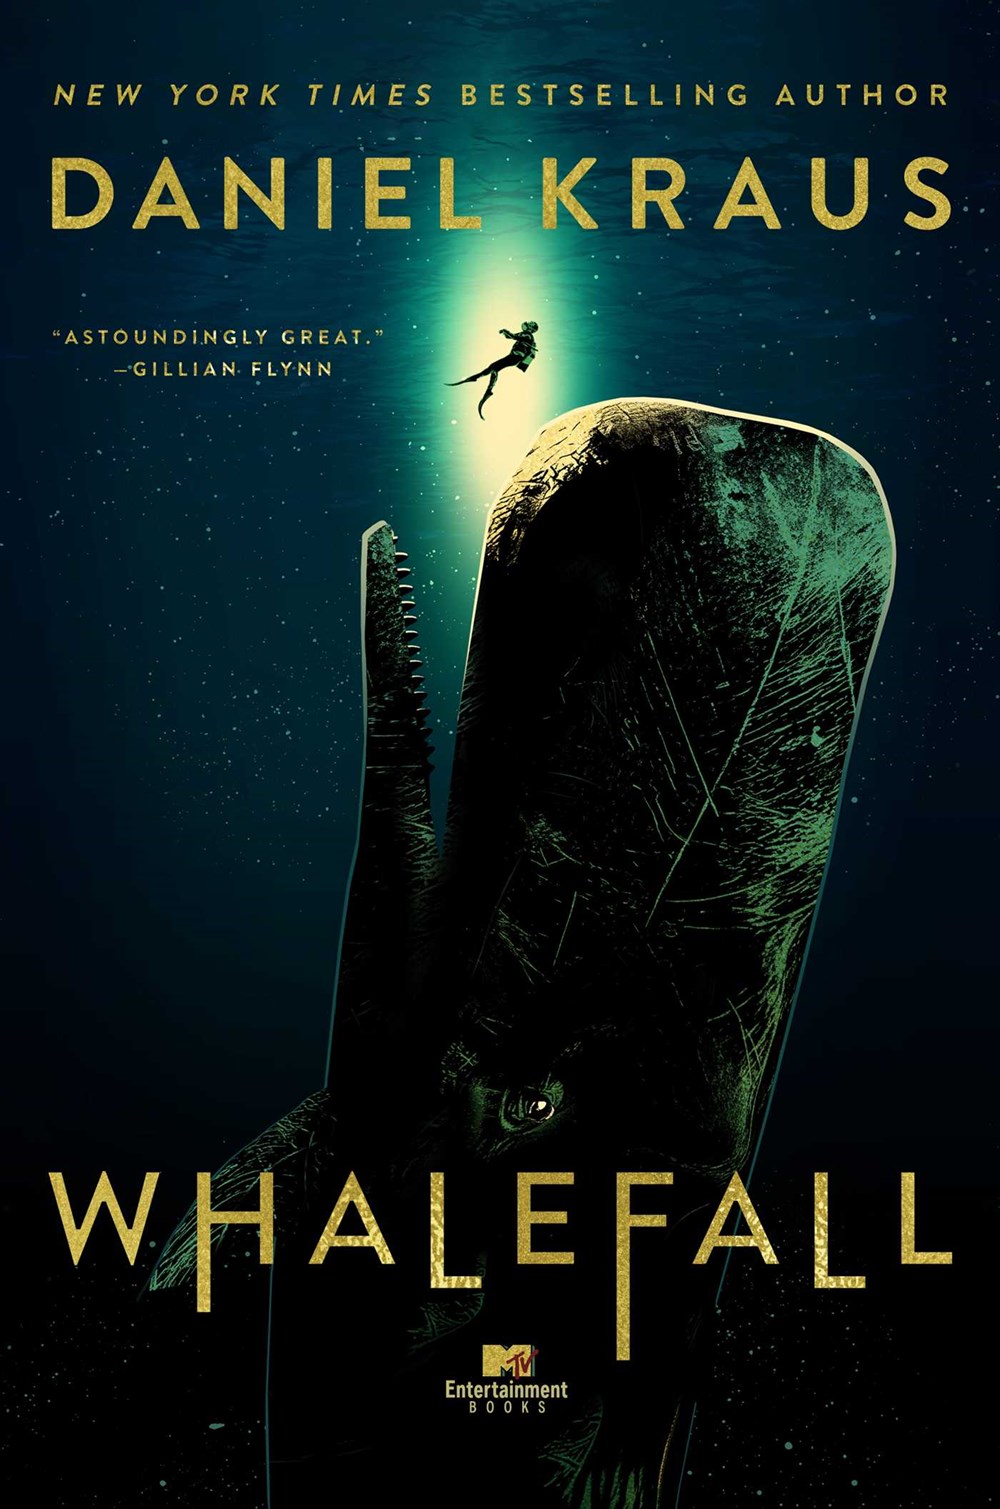 A Whale of a Story | Speculative Fiction and Nonfiction About Whales